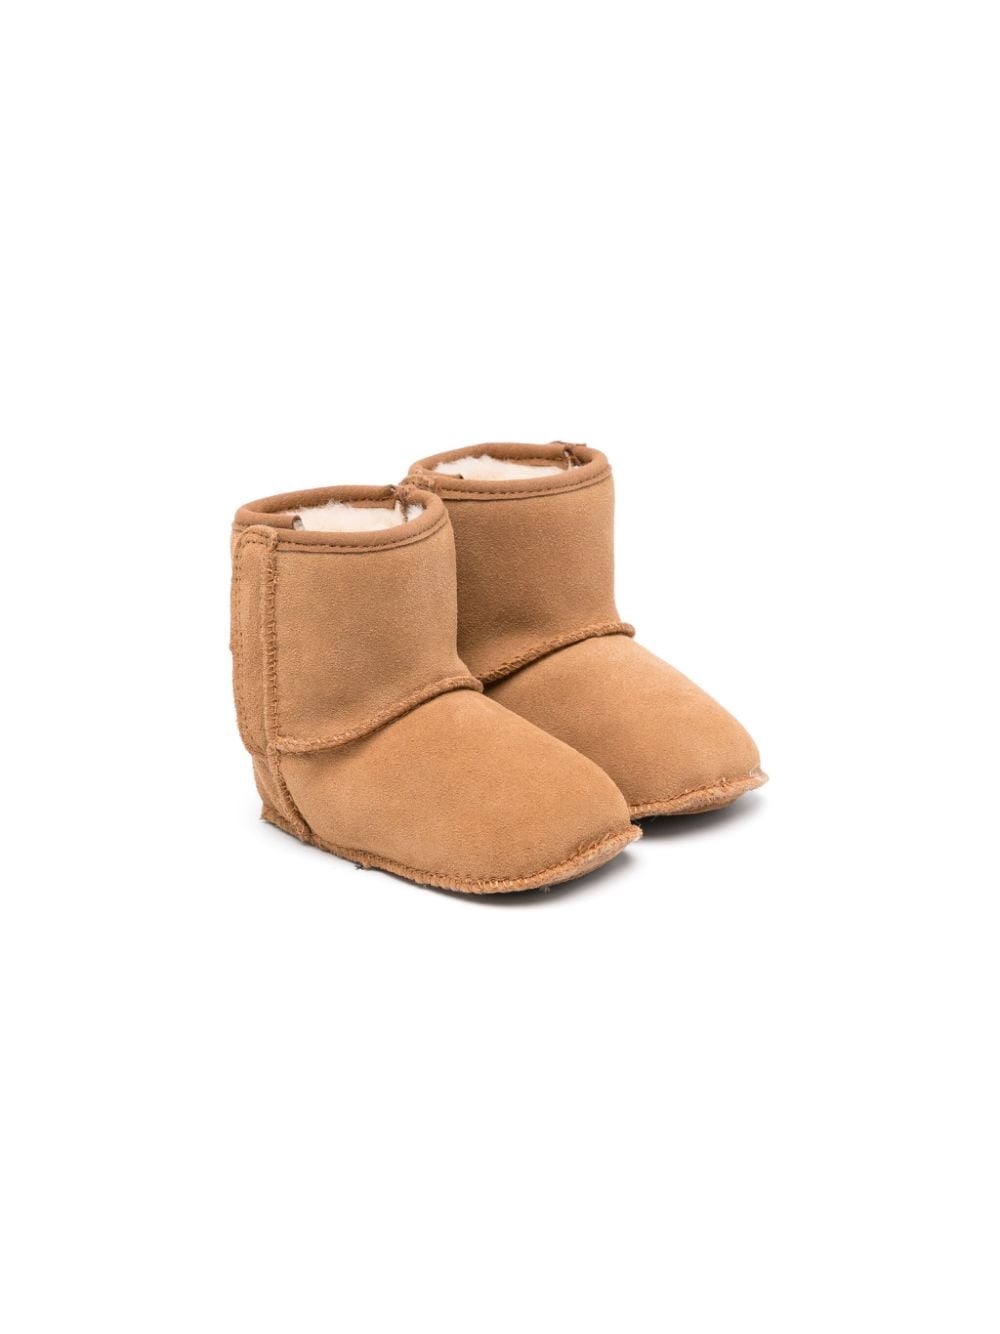 UGG Kids leather shearling-lined ankle boots - Brown von UGG Kids